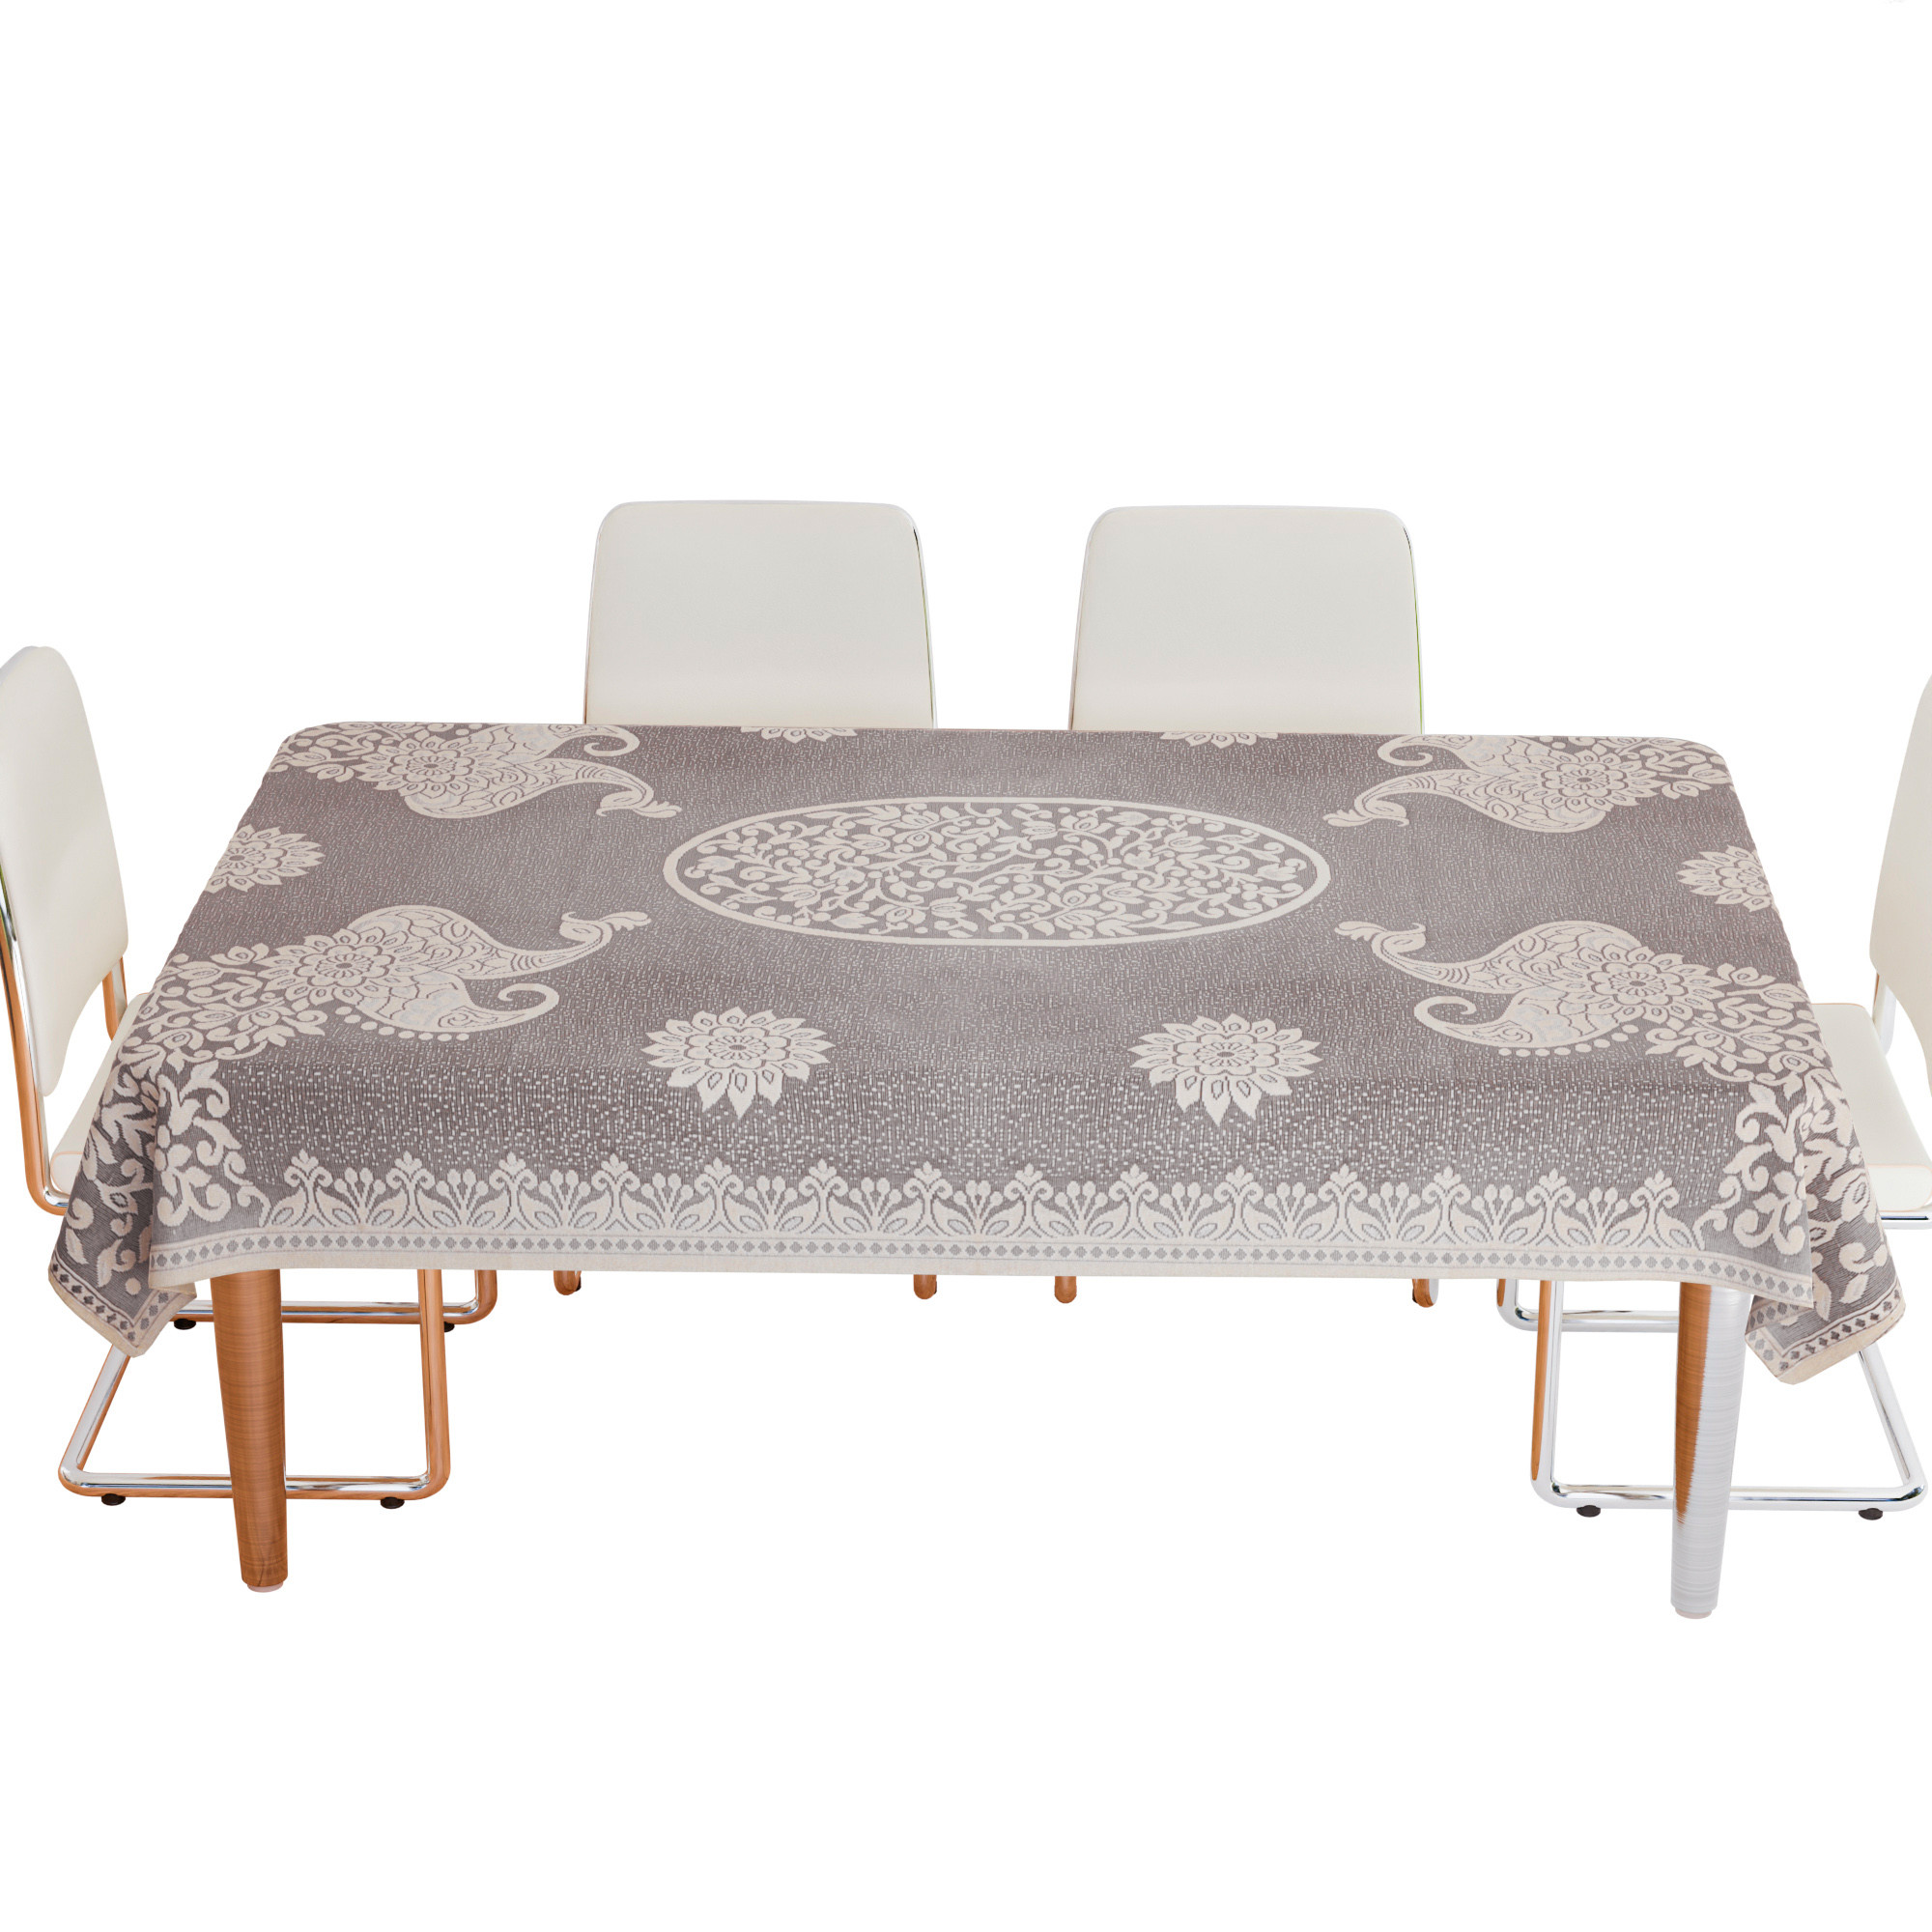 Kuber Industries Center & Dining Table Cover Set | Center & Dining Table Combo Set | Table Cover for Dining & Center | Table Protector Cover | Peacock Table Cover | Brown